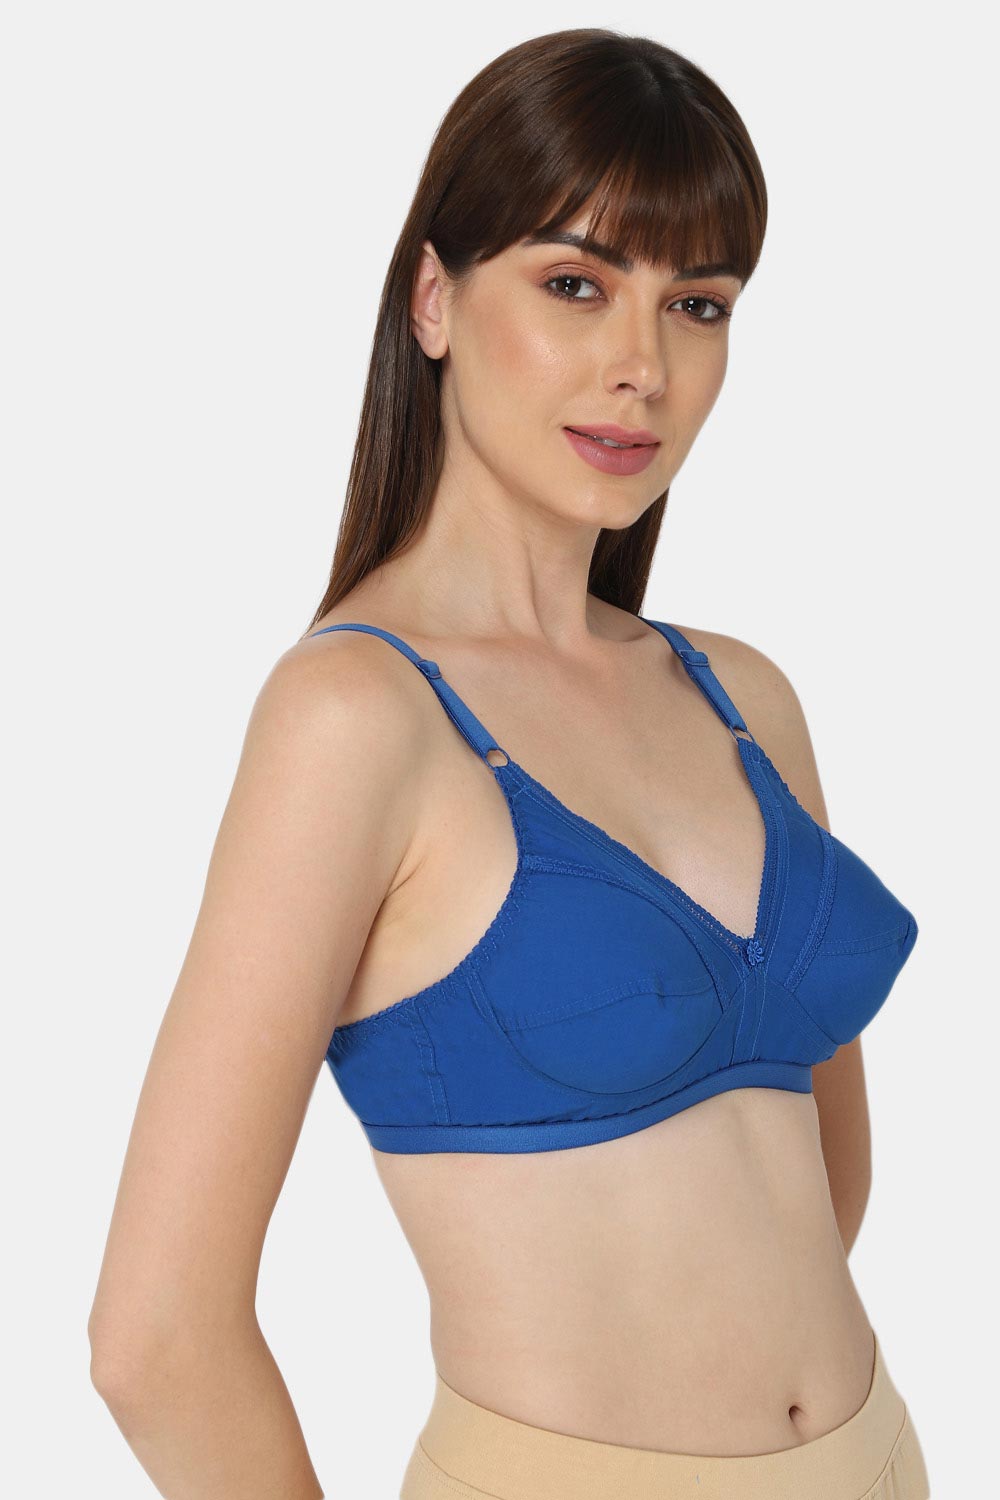 Naiduhall Saree Bra - Naturalle - Other Colors Size   30B Color BLUEATOLL